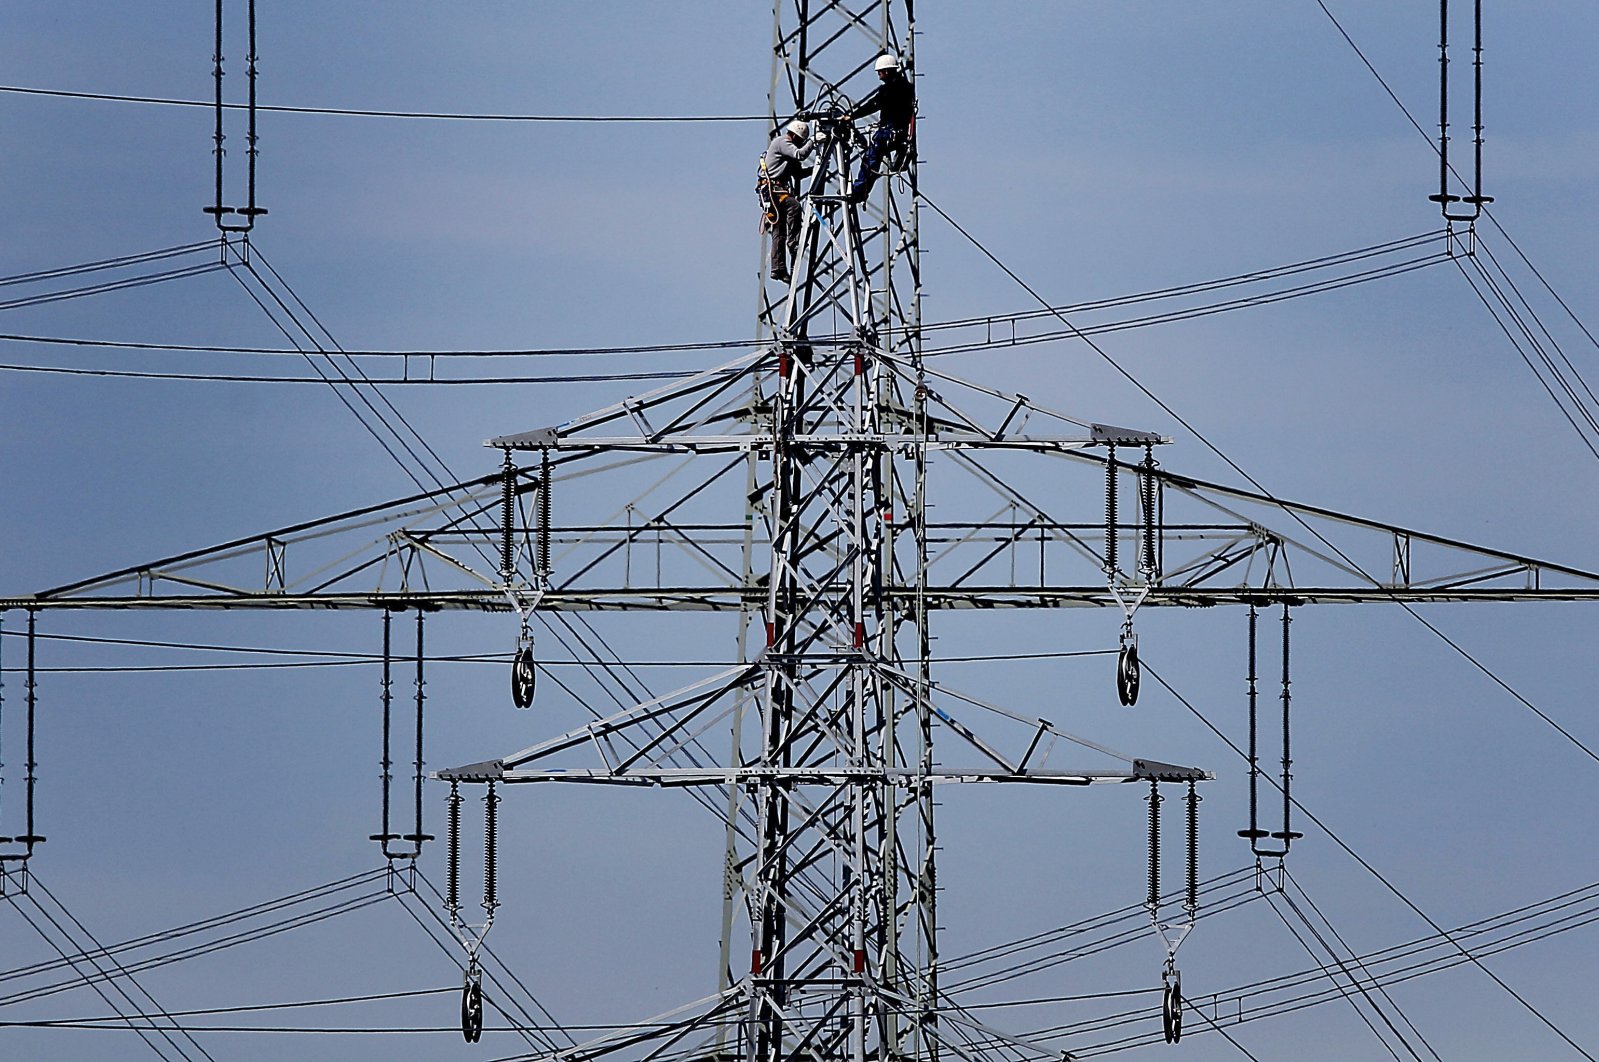 Workers of the German energy company RWE prepare power supply on a high power pylon in Moers, Germany, April 11, 2011. (AP Photo)